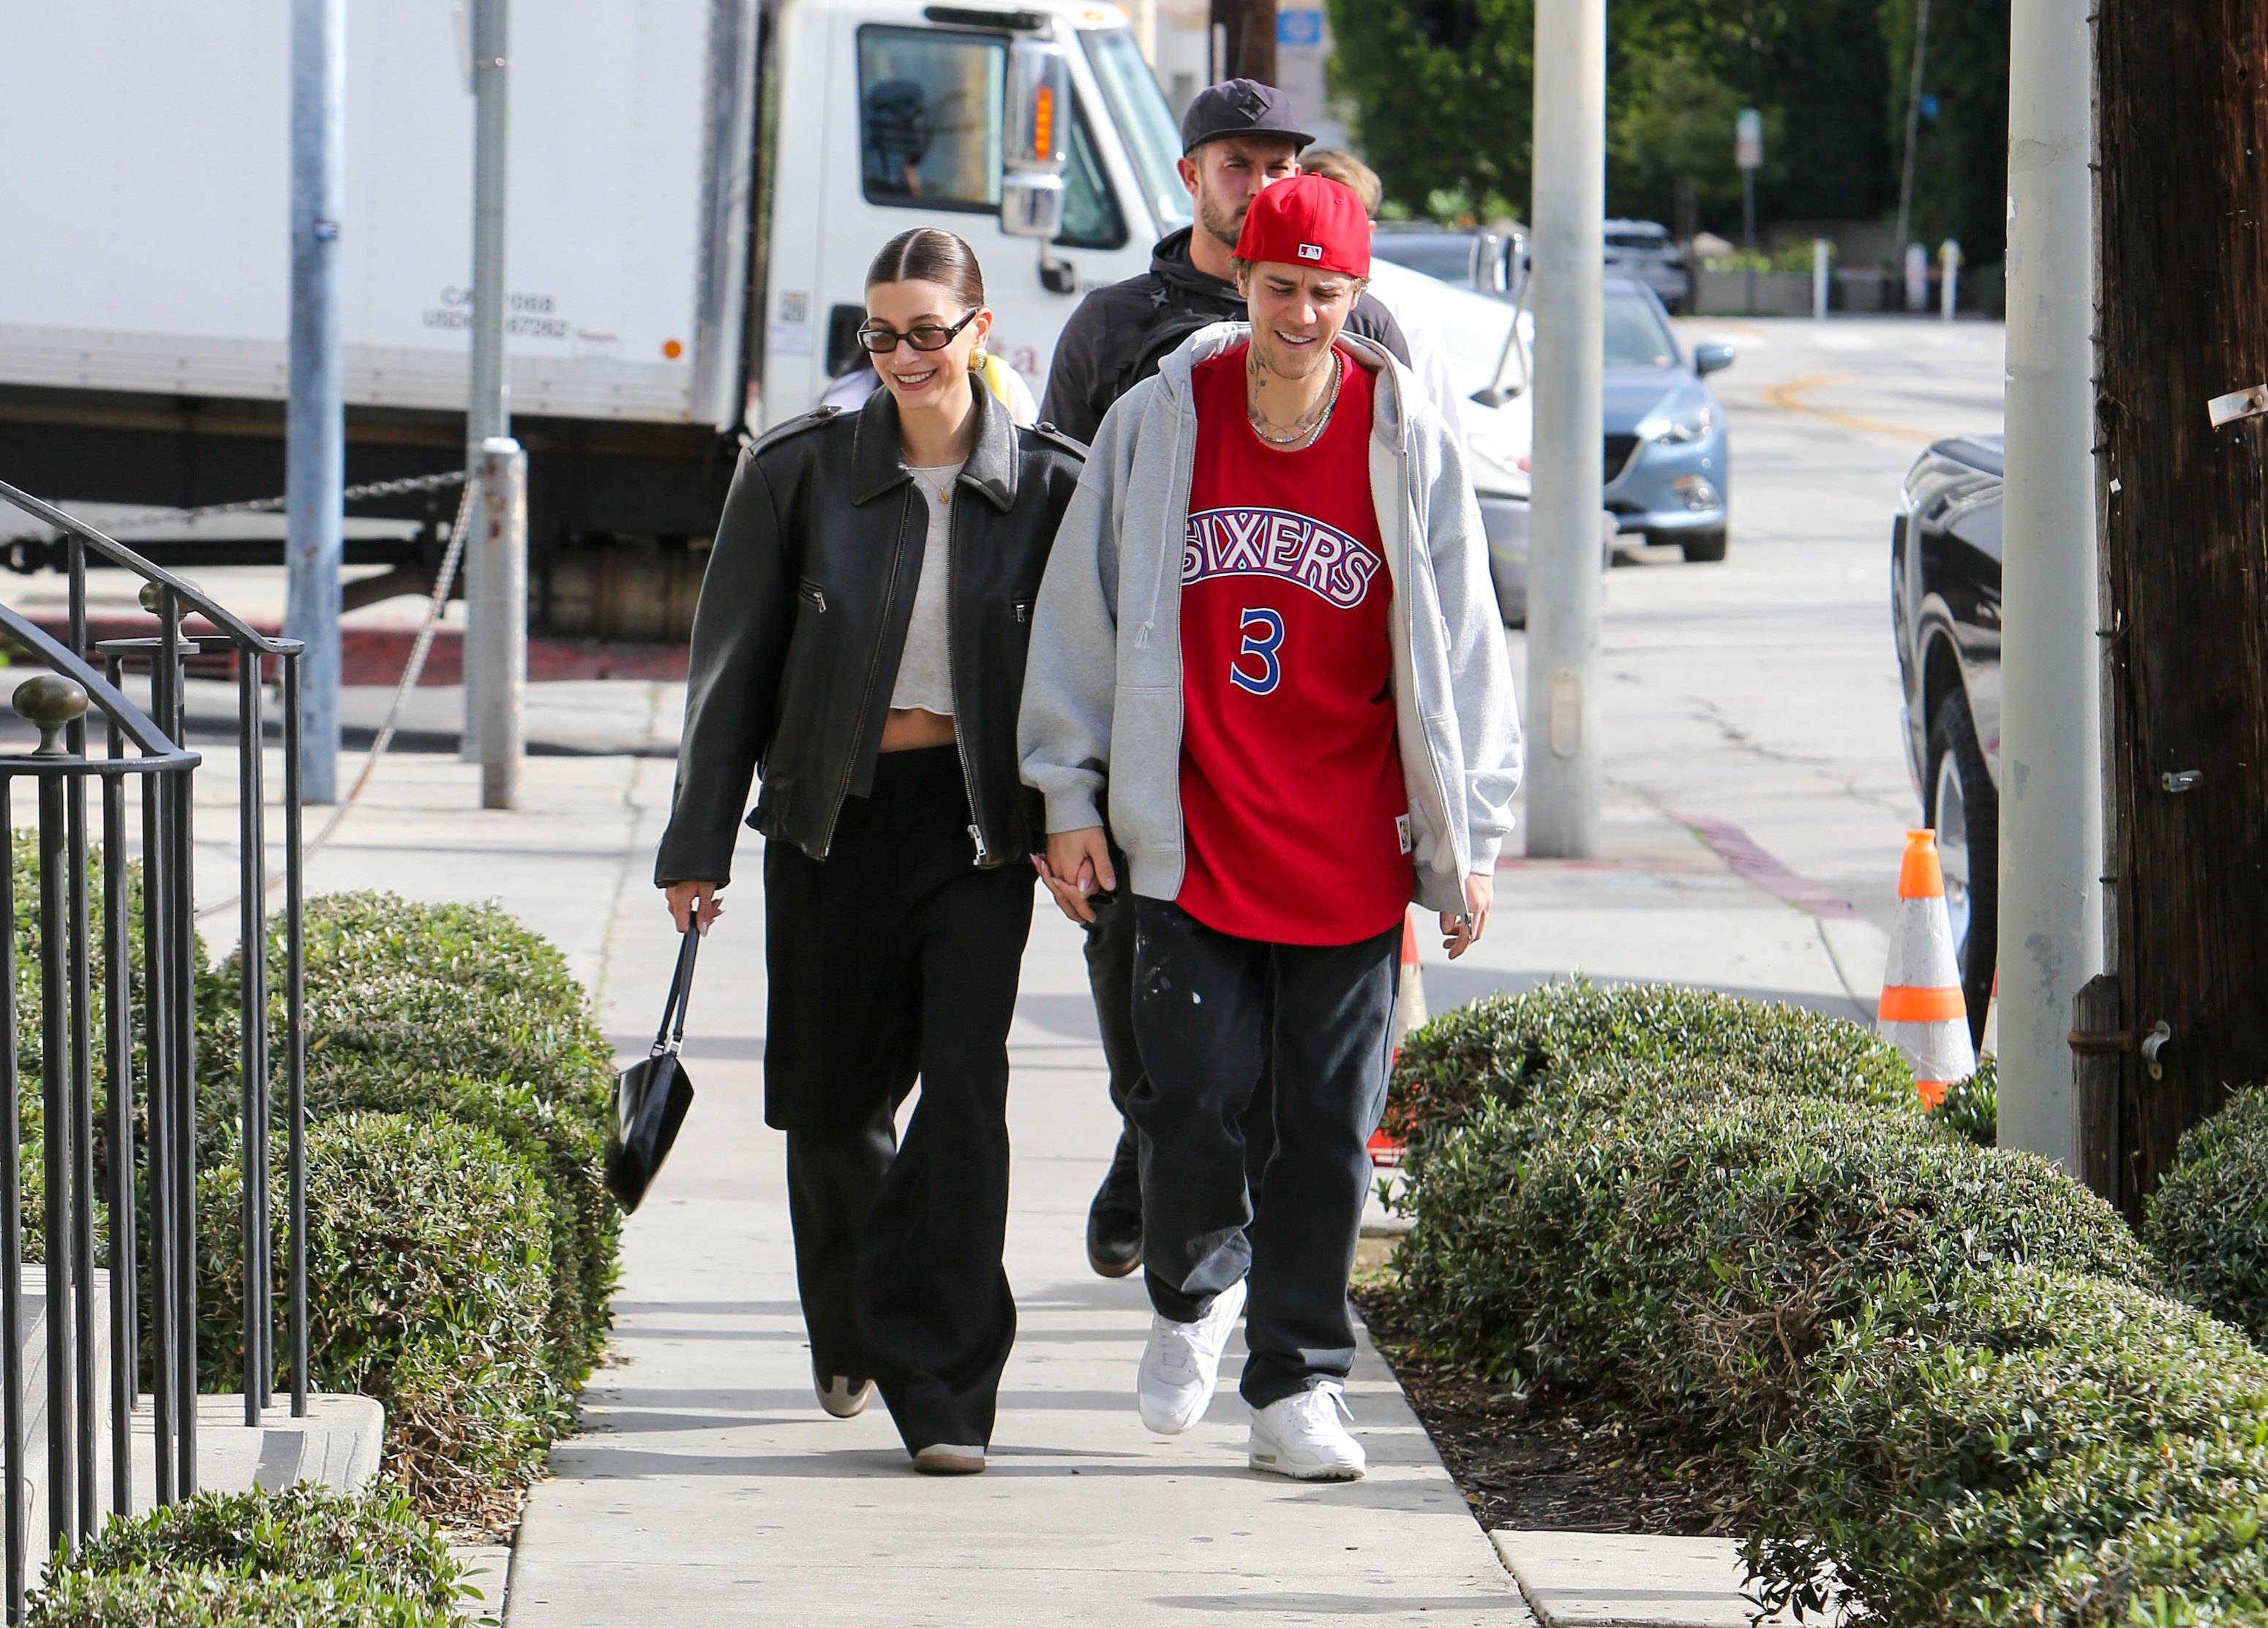 In January 2023, Hailey and Justin walked down a street in LA hand in hand